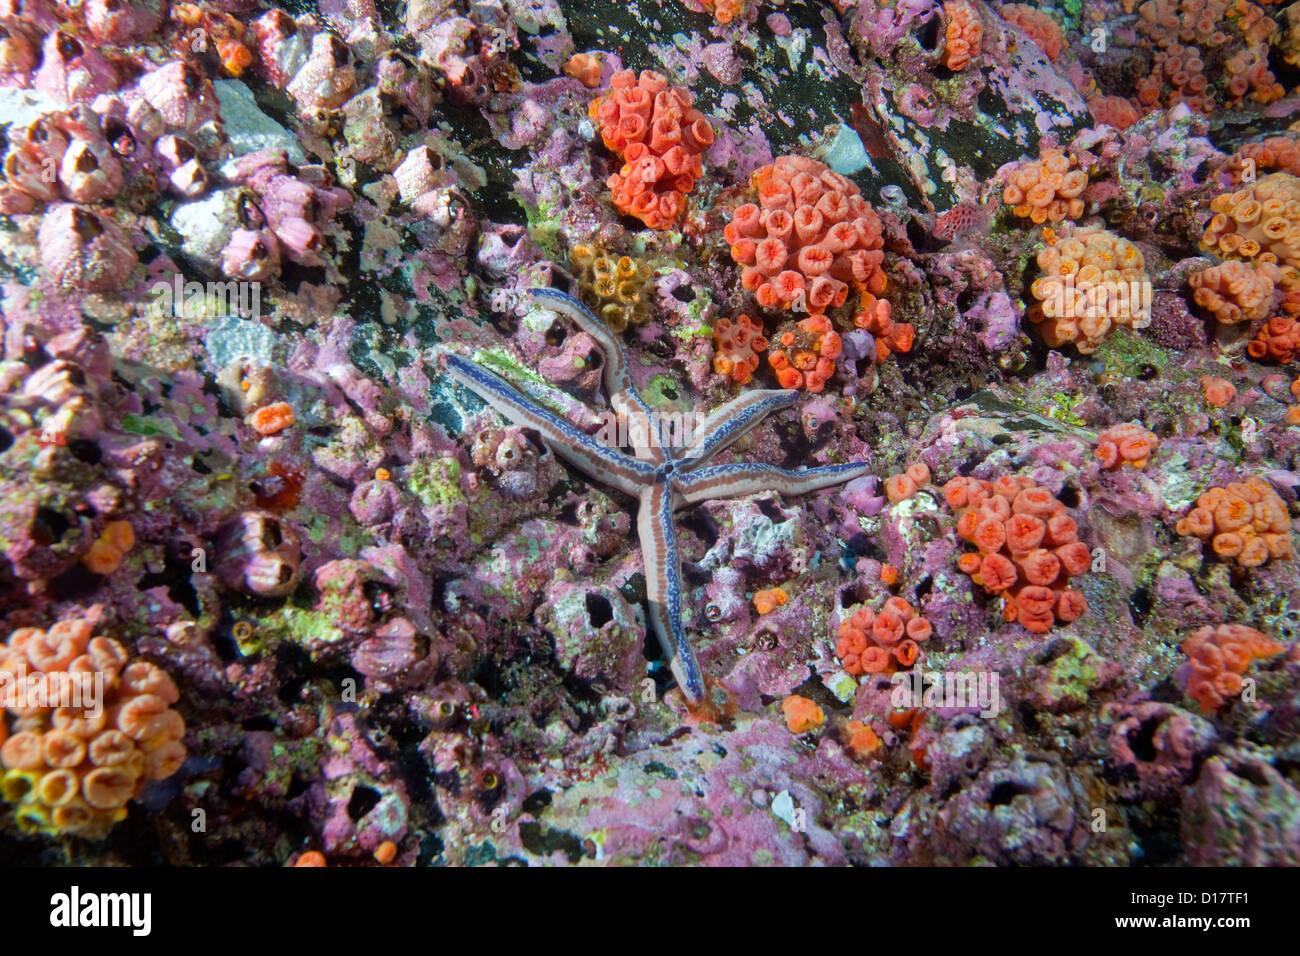 A sea star blends in on a coral reef at the Cocos Island off the coast of Costa Rica. Stock Photo